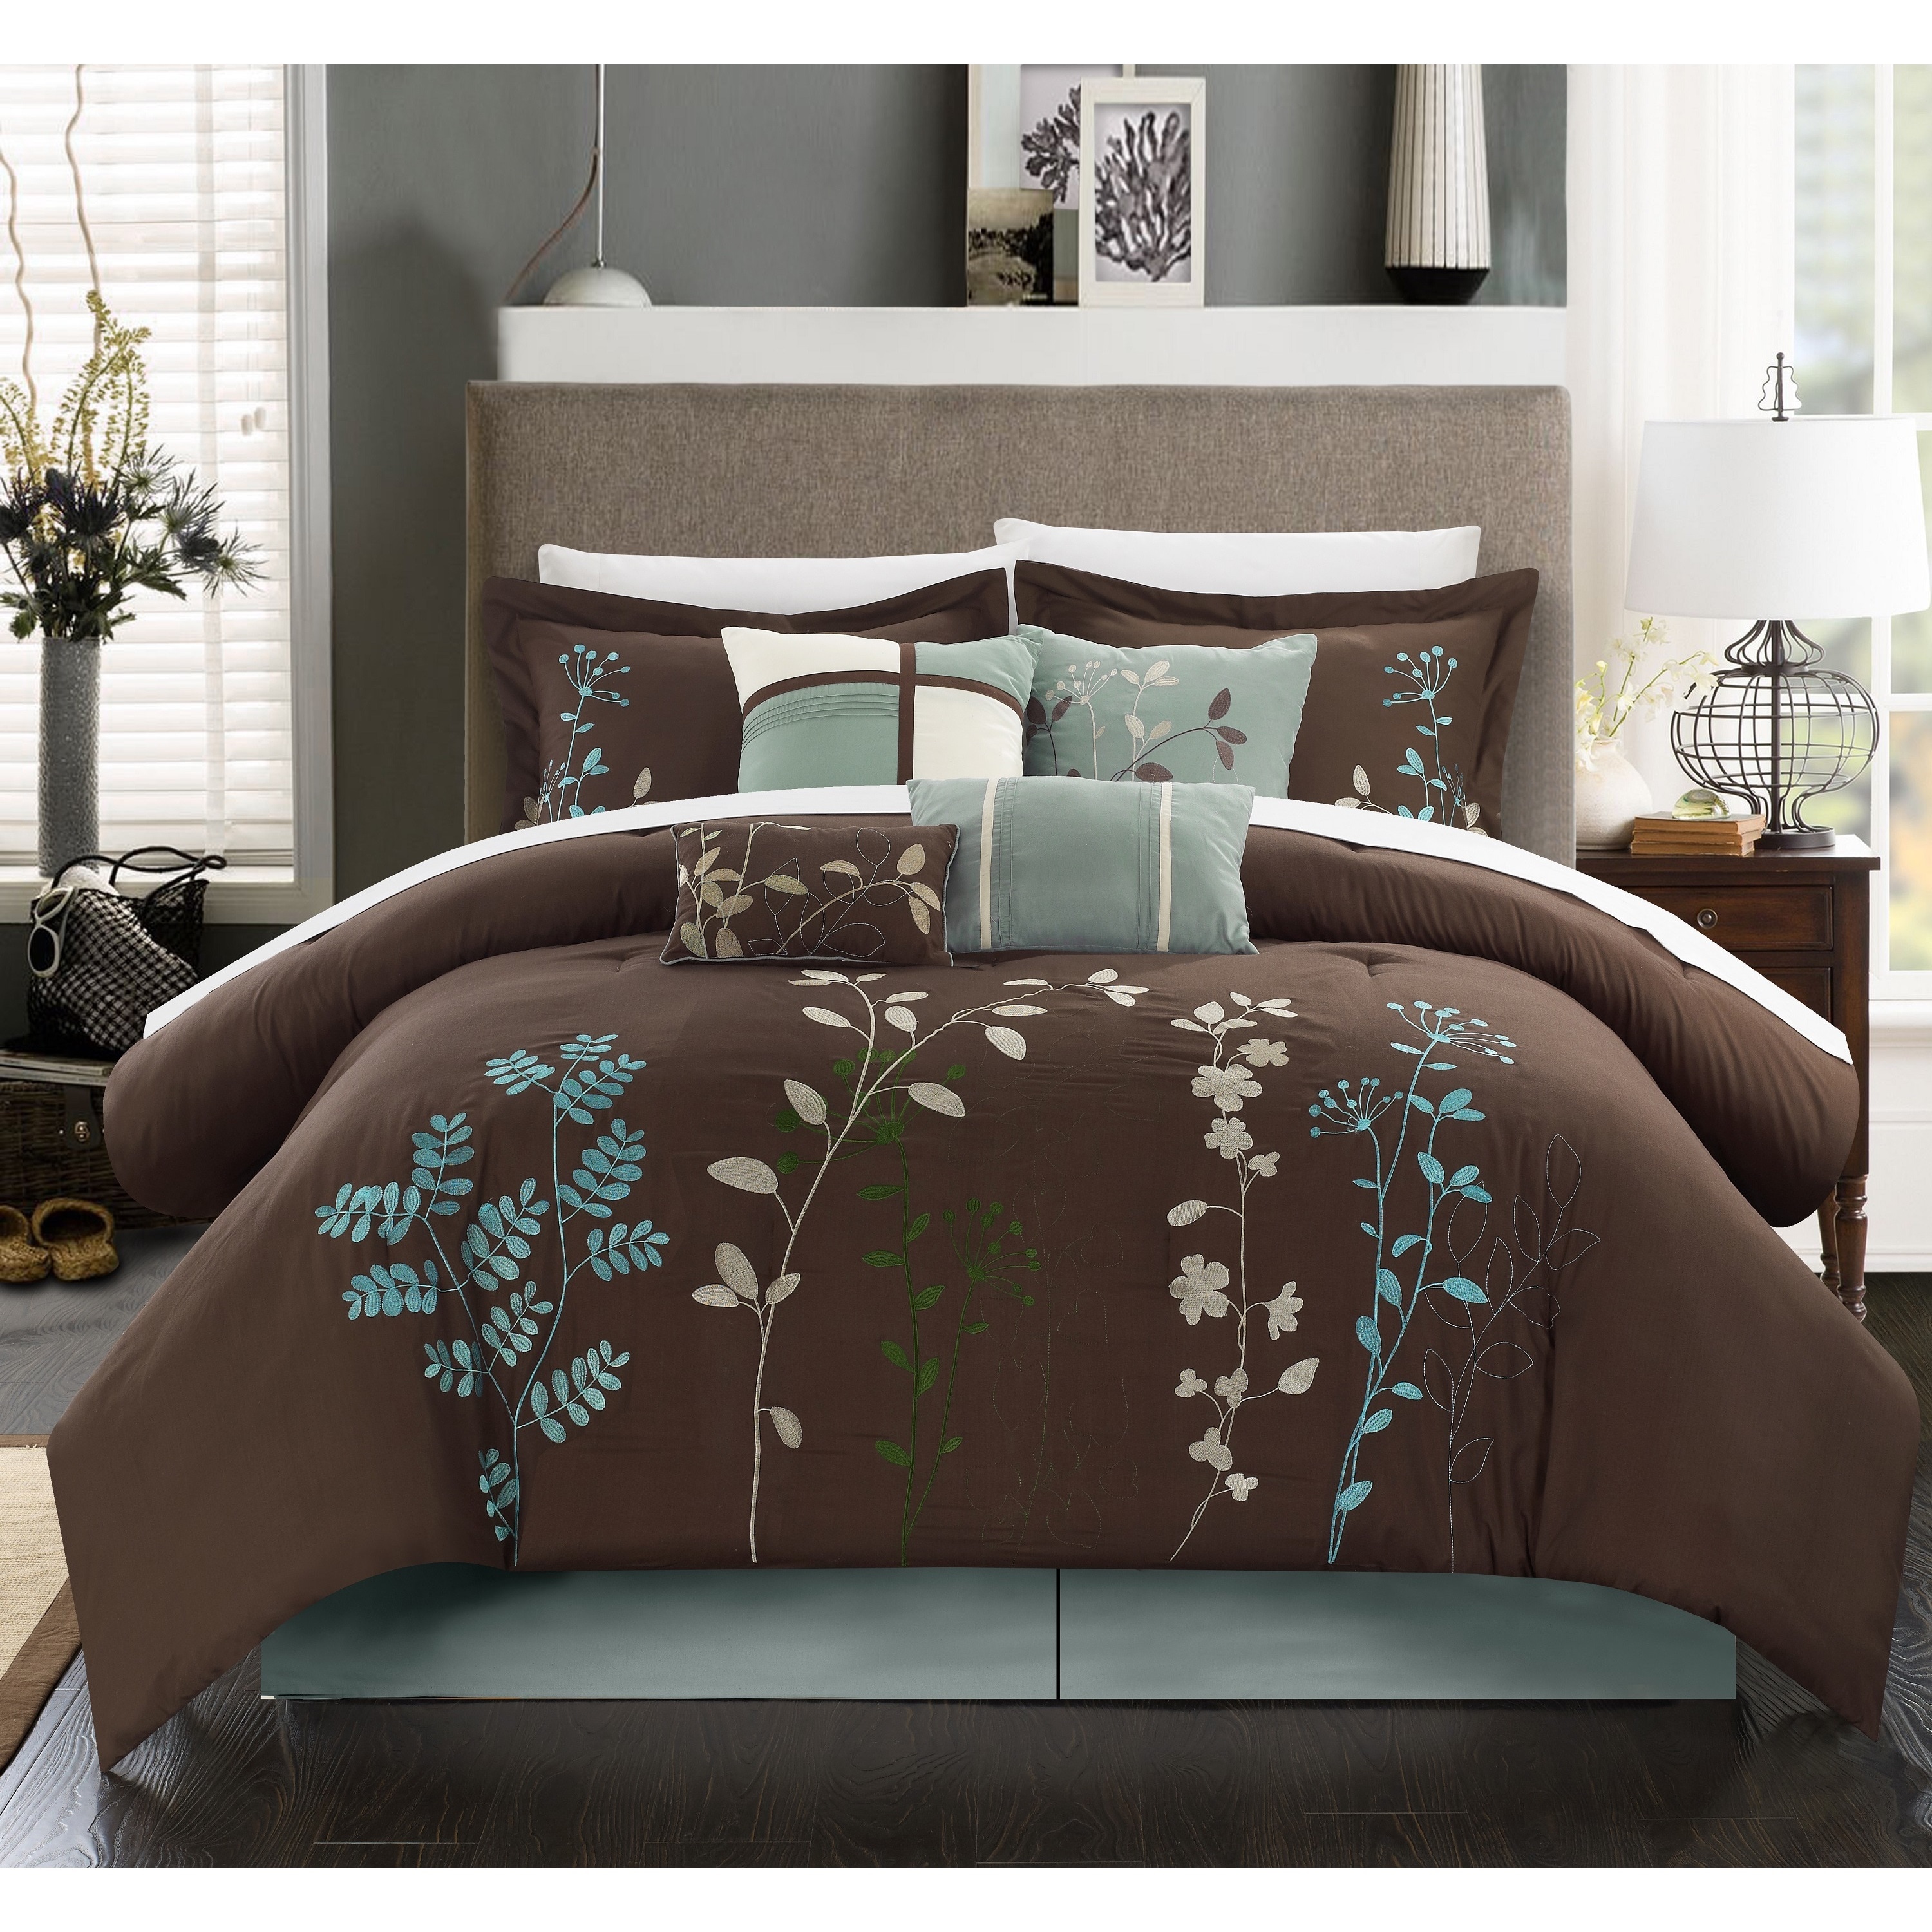 Shop Copper Grove Pelee Chocolate Brown 12 Piece Bed In A Bag Set